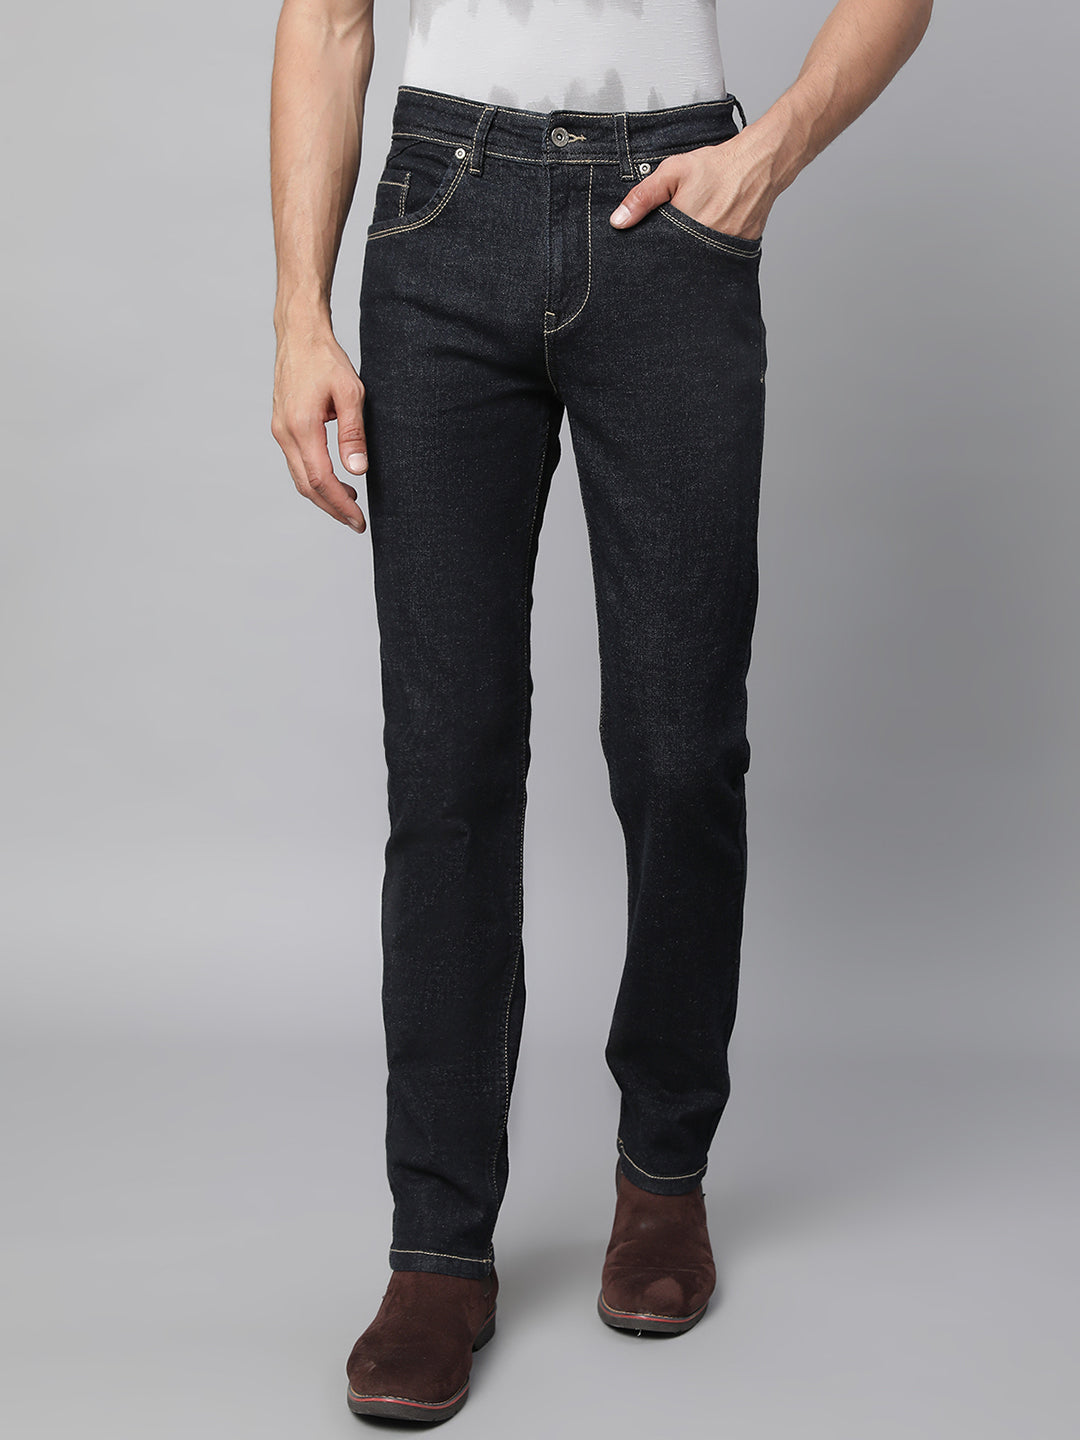 Mens Raw Black Cotton Solid Jeans